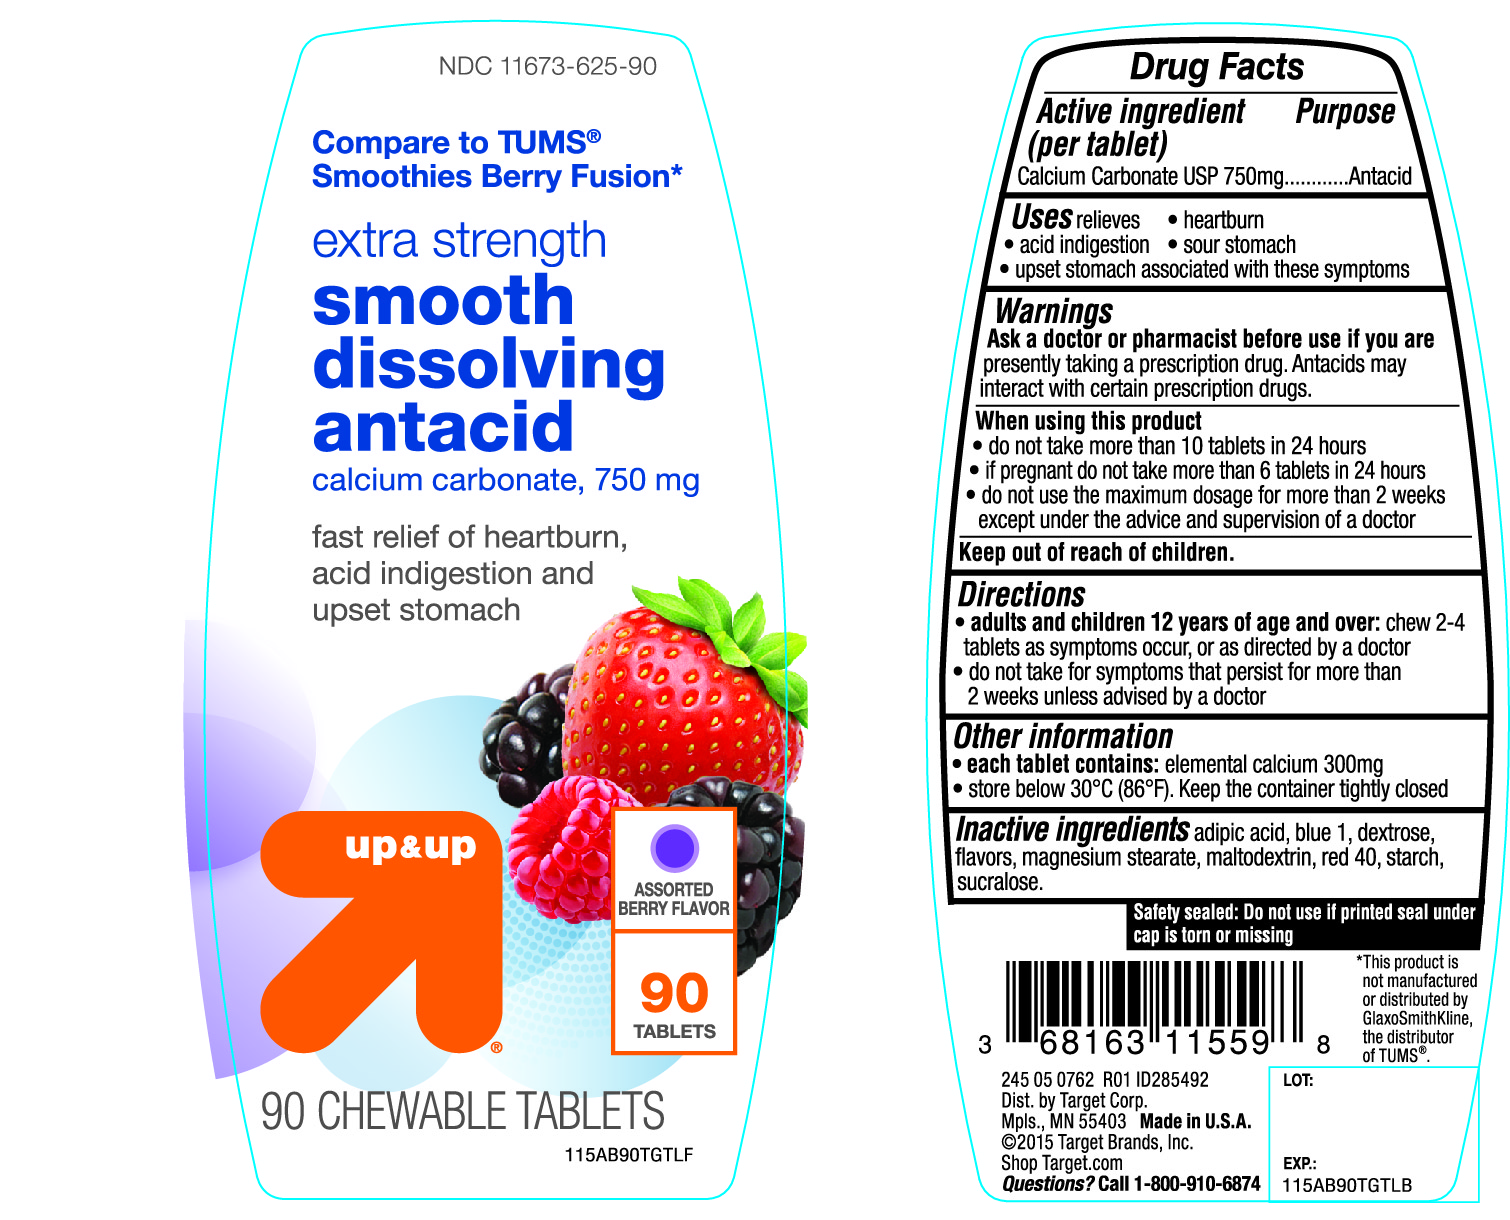 up and up extra strength smooth dissolving antacid